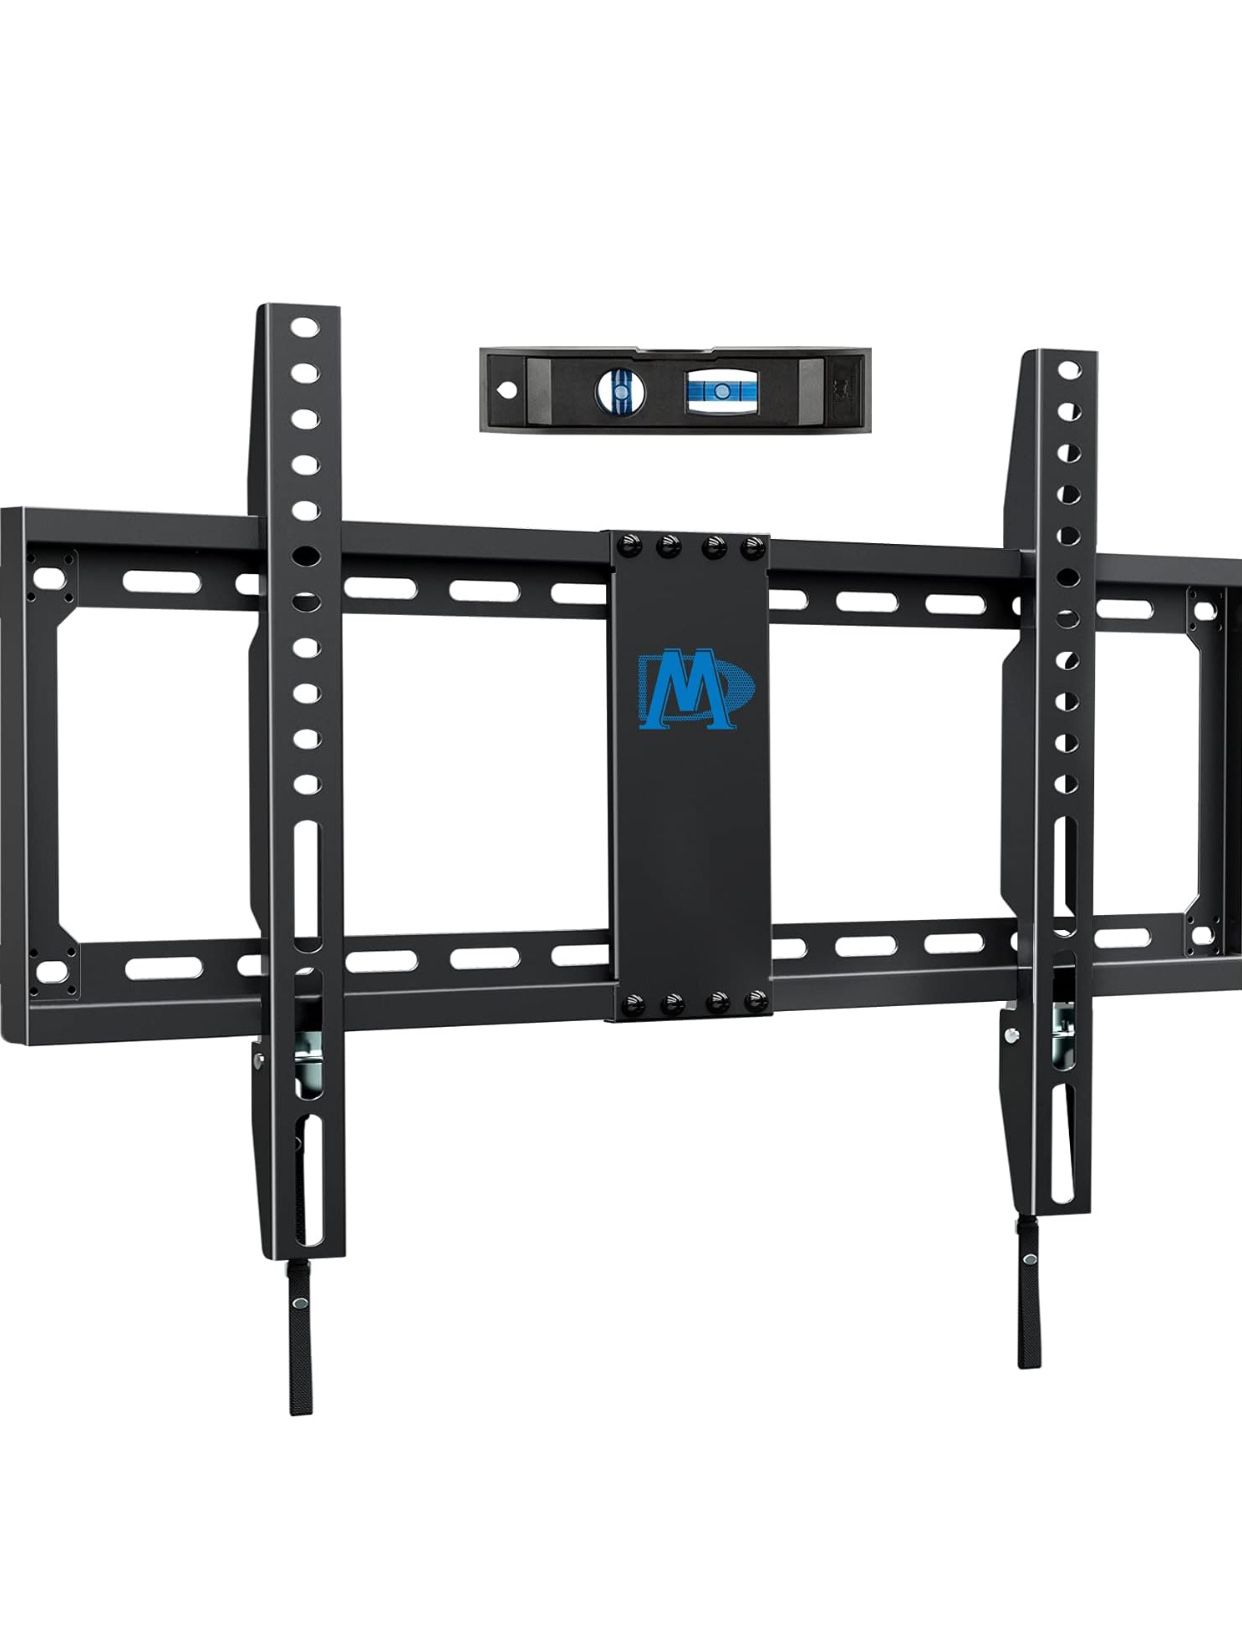 Mounting Dream TV Mount Fixed for Most 42-84 Inch Flat Screen TVs, TV Wall Mount Bracket up to VESA 600 x 400mm and 132 lbs - Fits 16"/18"/24" Studs -